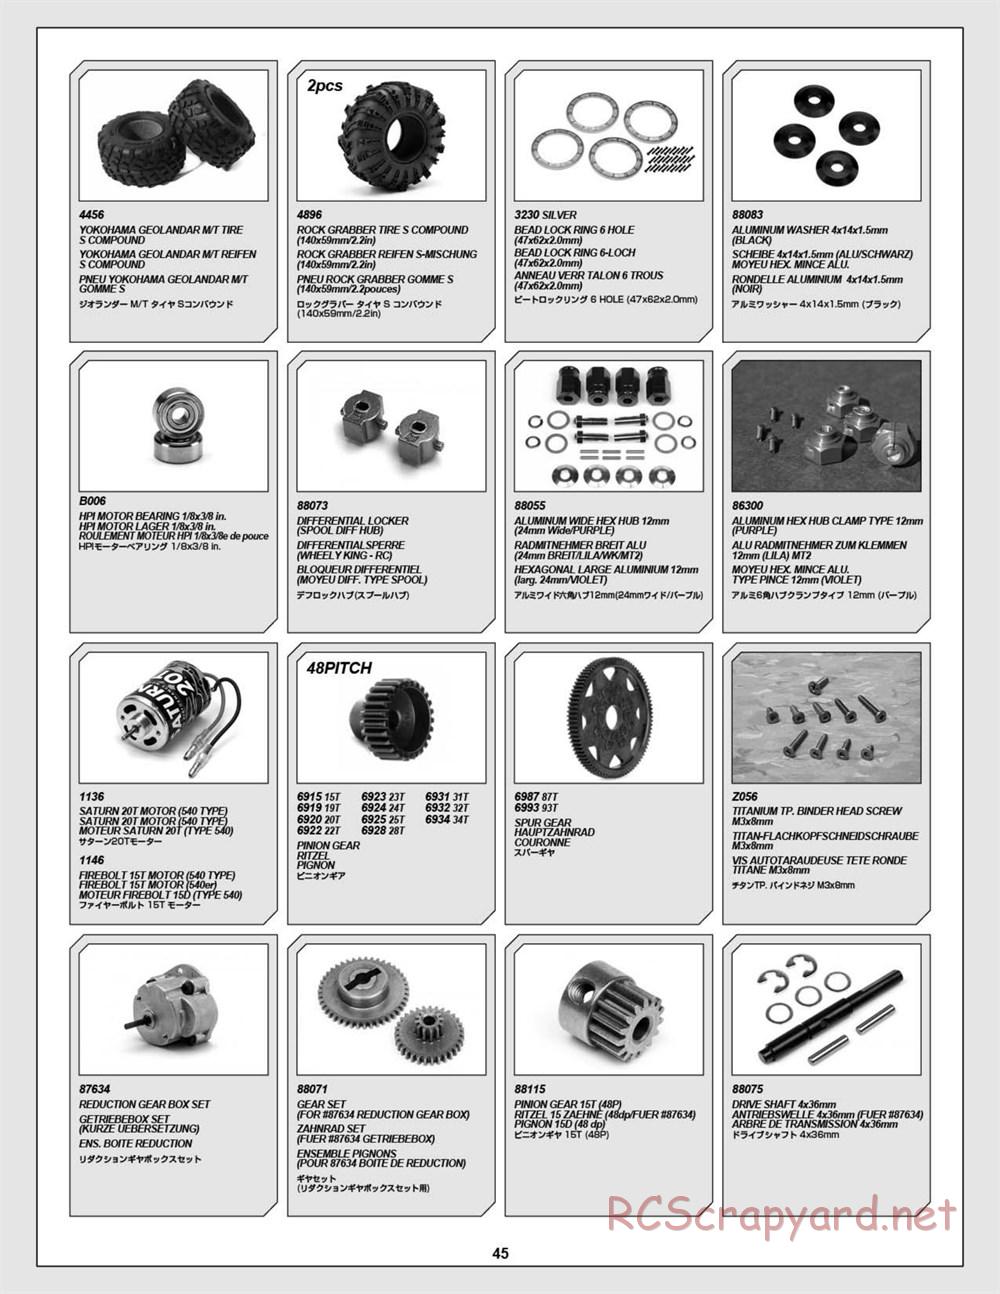 HPI - Wheely King 4x4 - Exploded View - Page 45